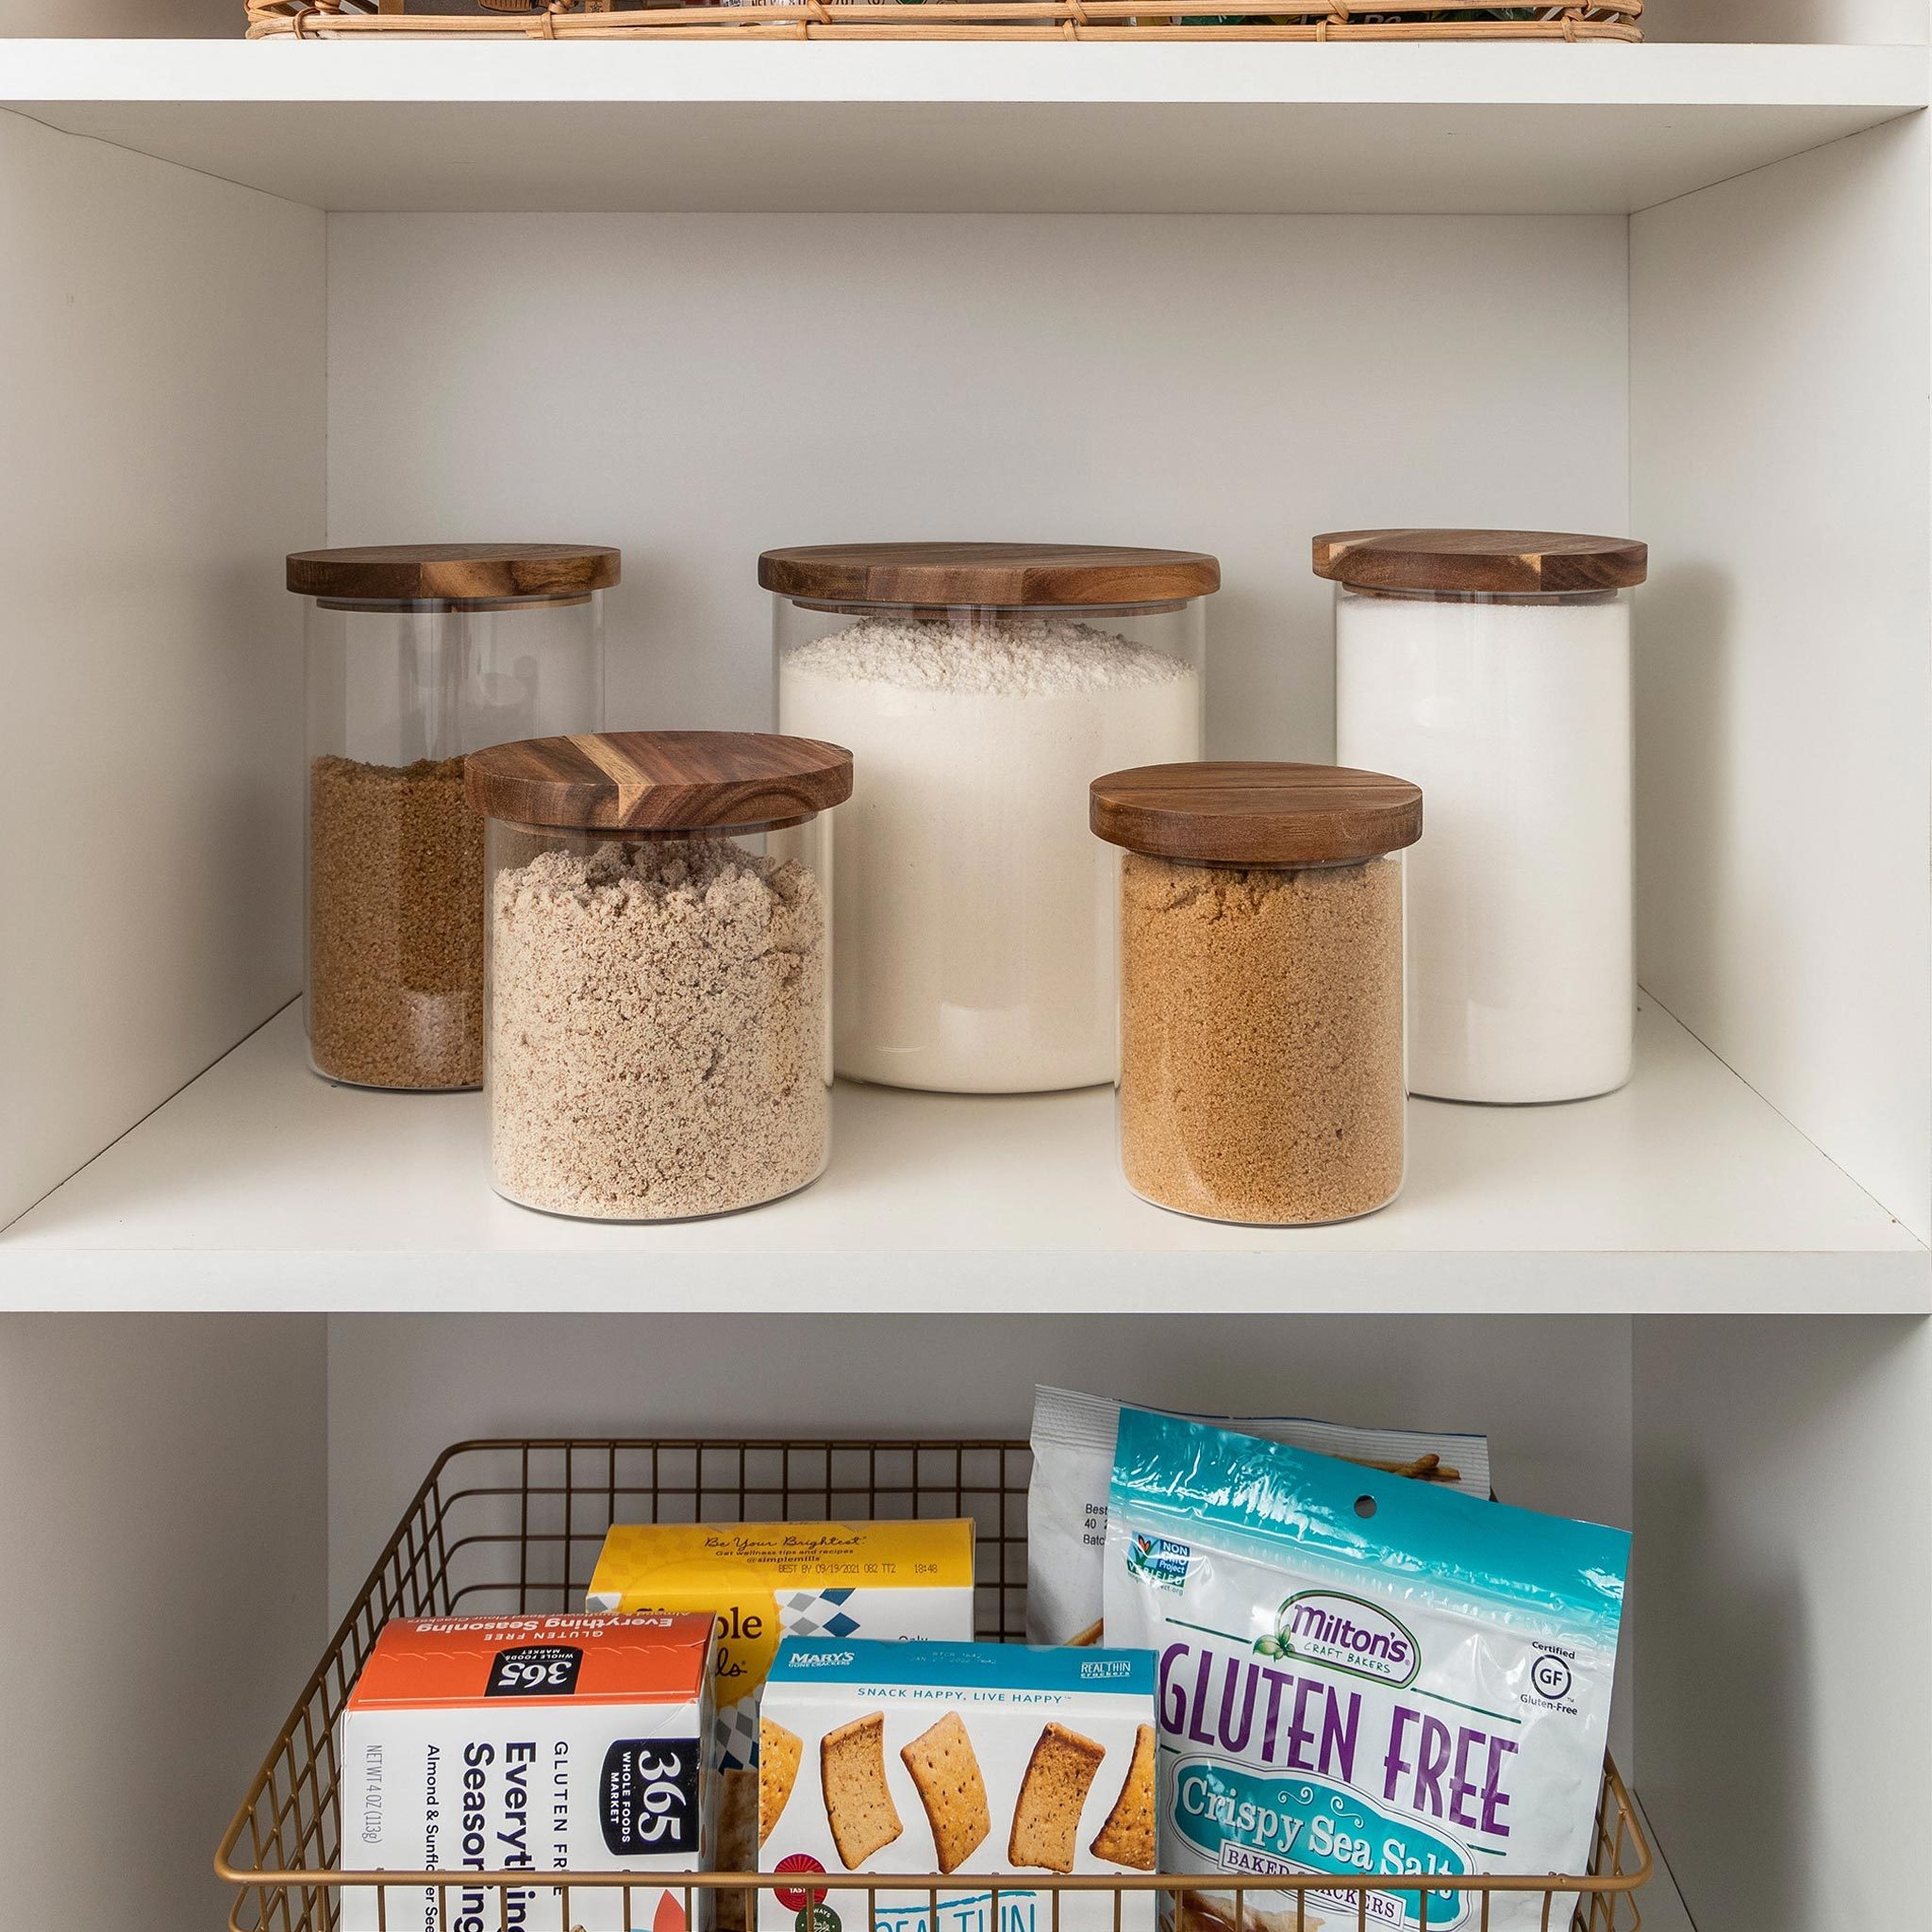 Best Pantry Storage Containers and Organizers for Food - Caitlin Marie  Design